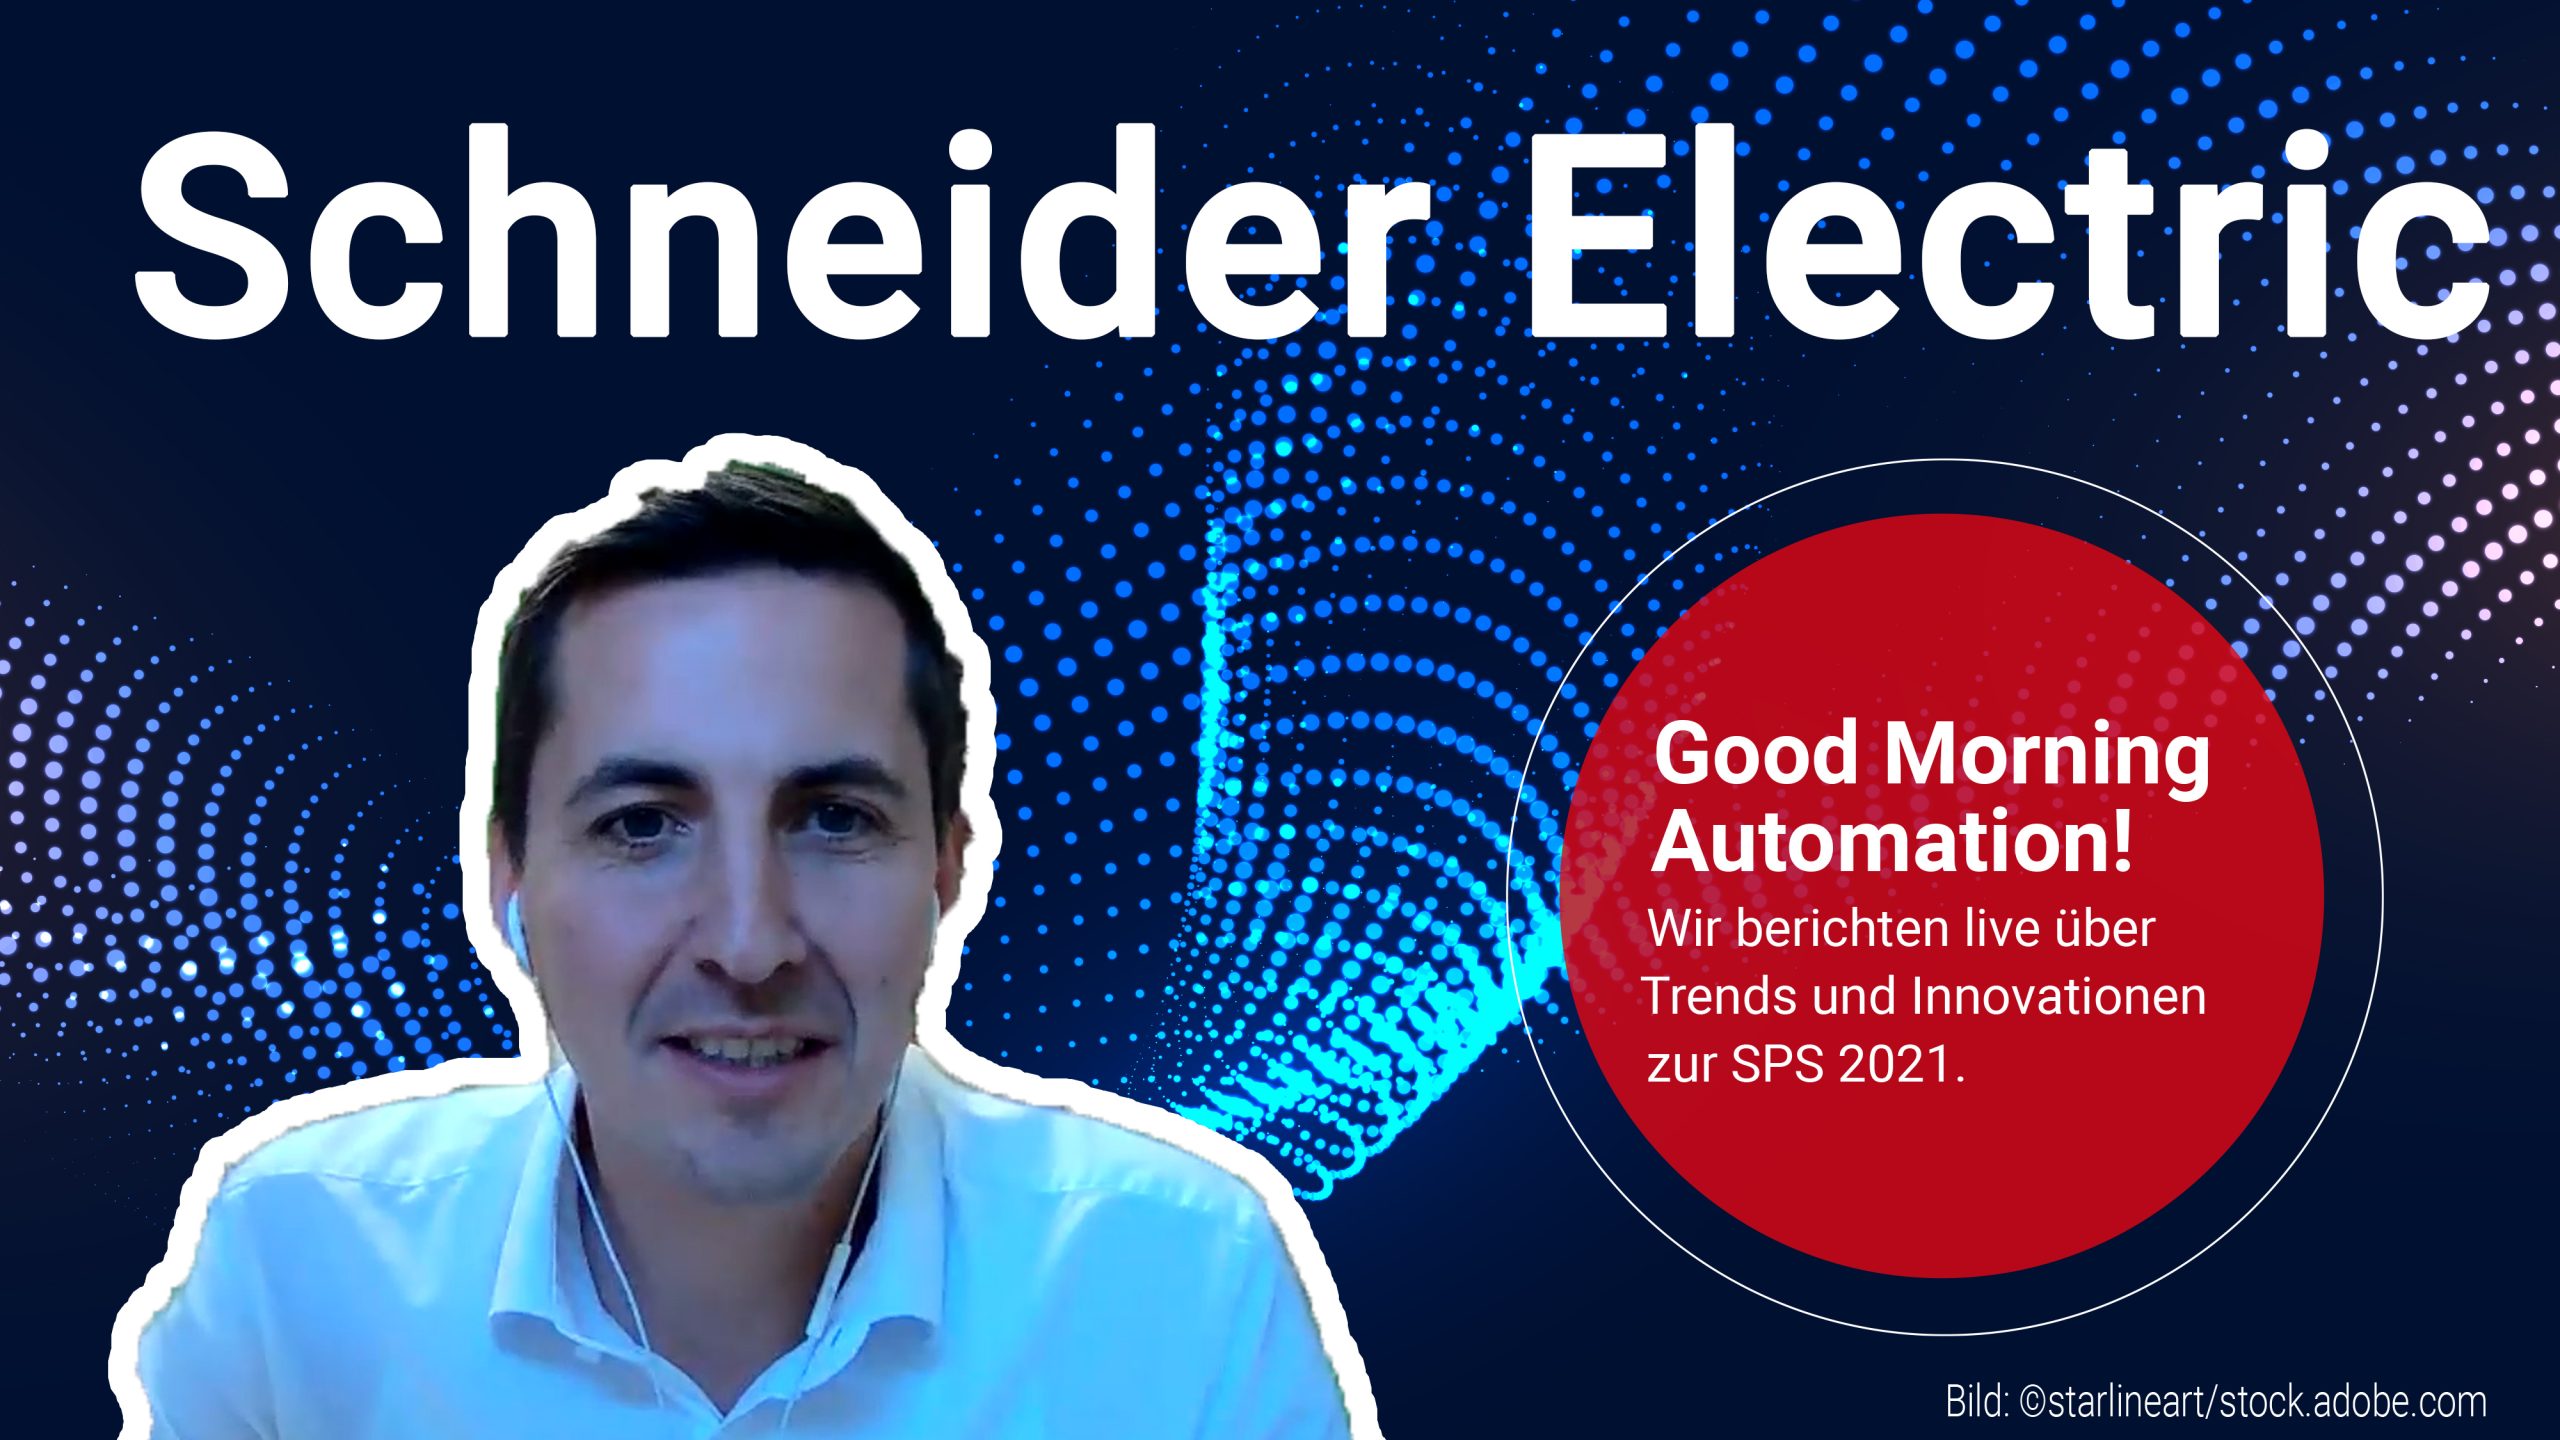 Schneider Electric bei Good Morning Automation Tag 1